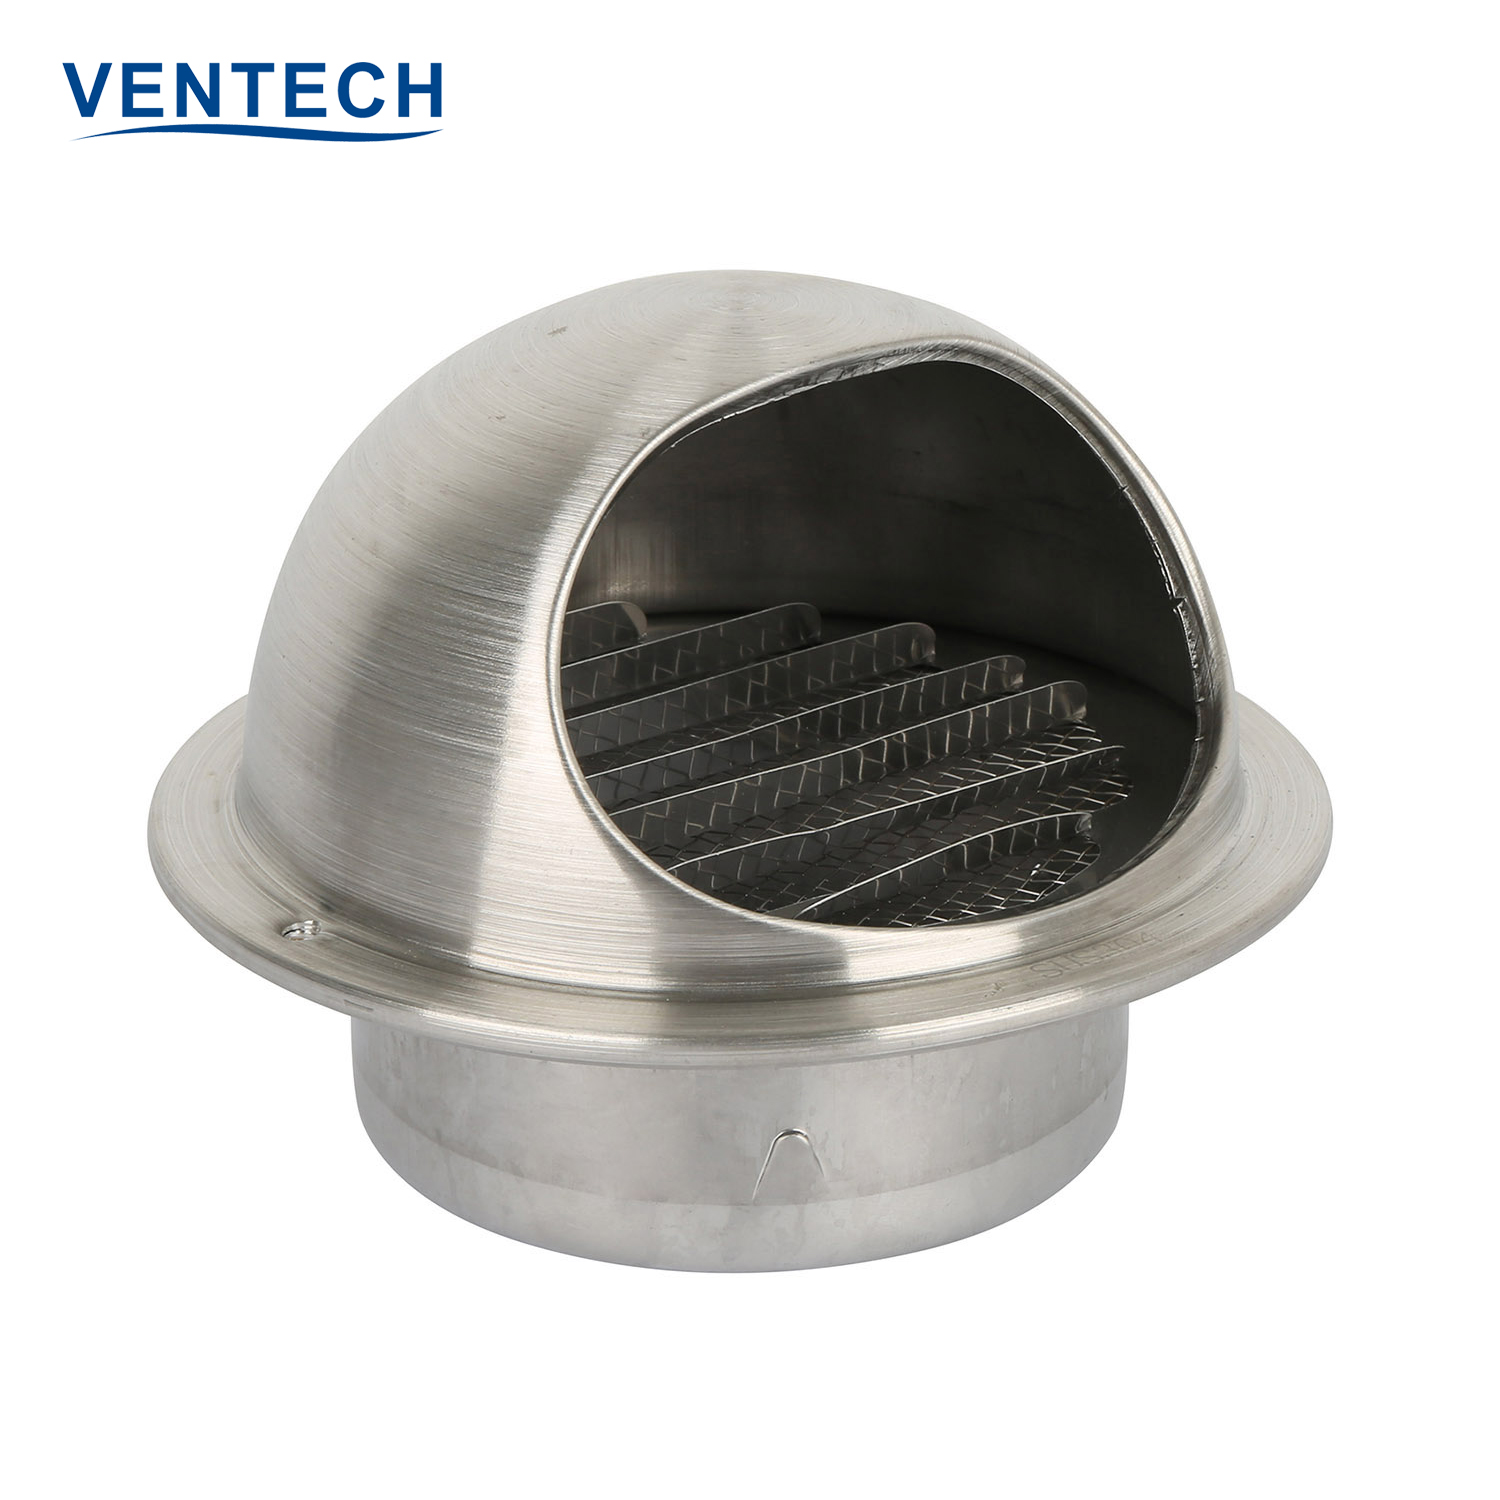 Hvac outside wall mounted air vents cap round ball weather louver